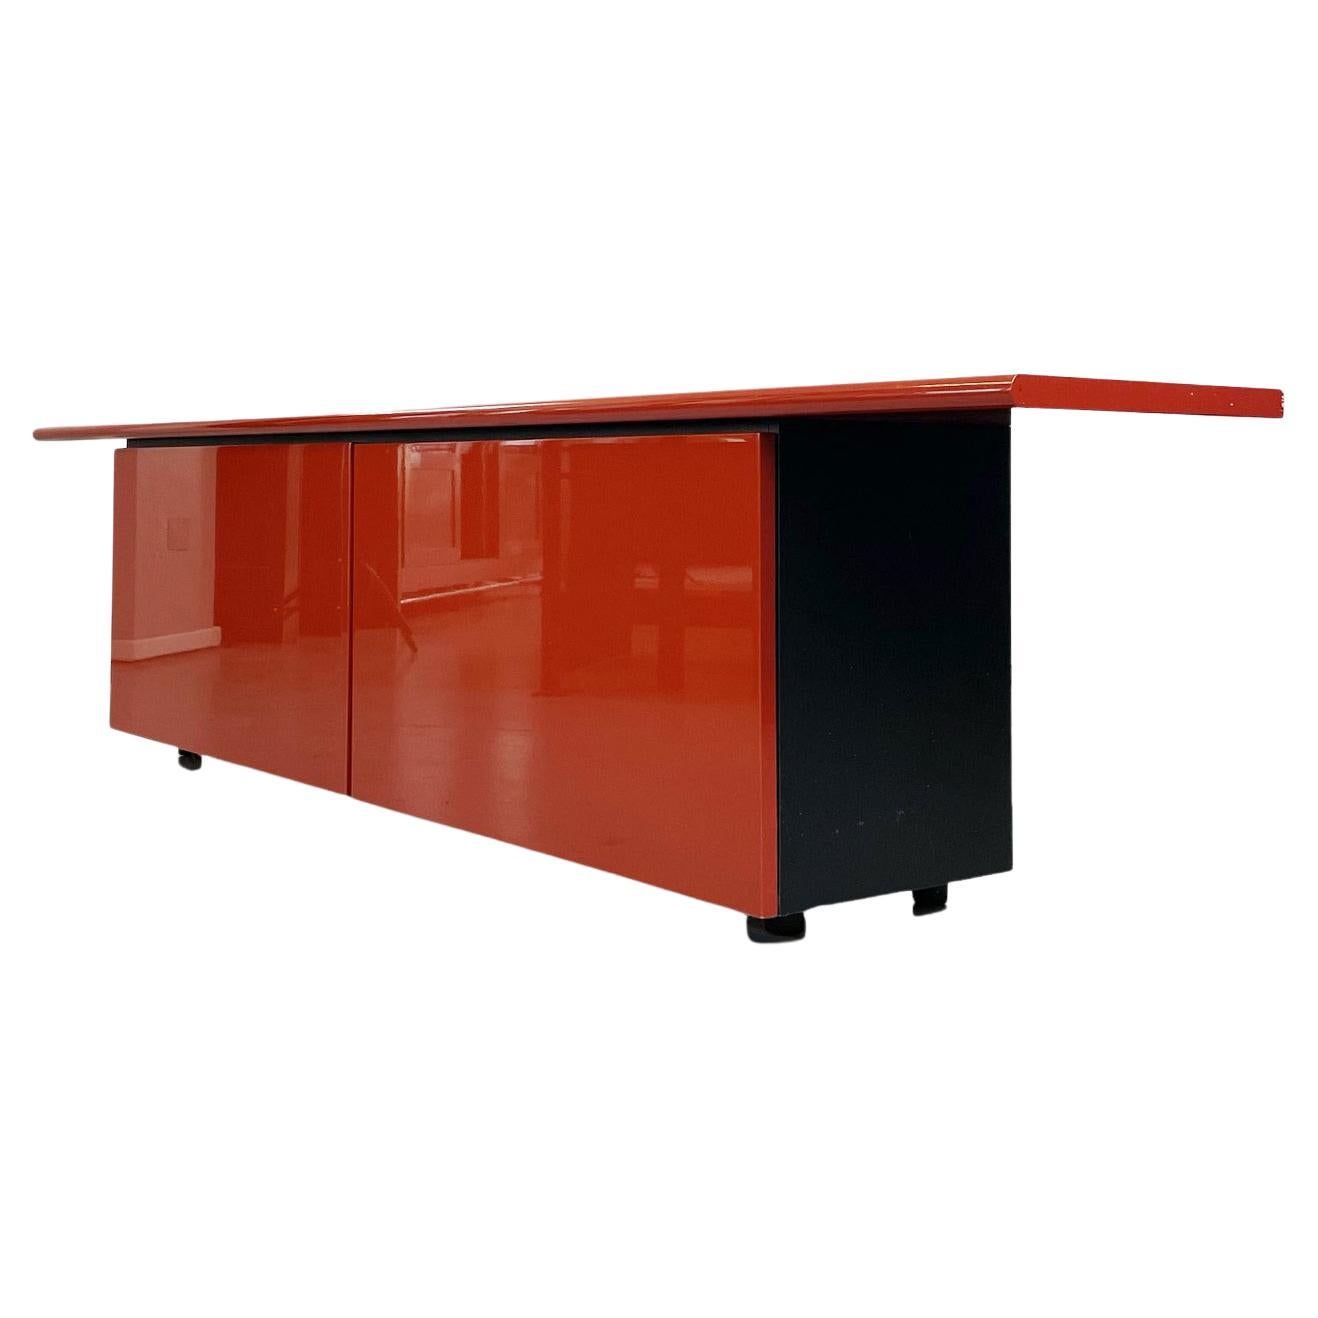 Italian Mid-Century Sheraton Sideboard by Stoppino and Acerbis for Acerbis, 1980s